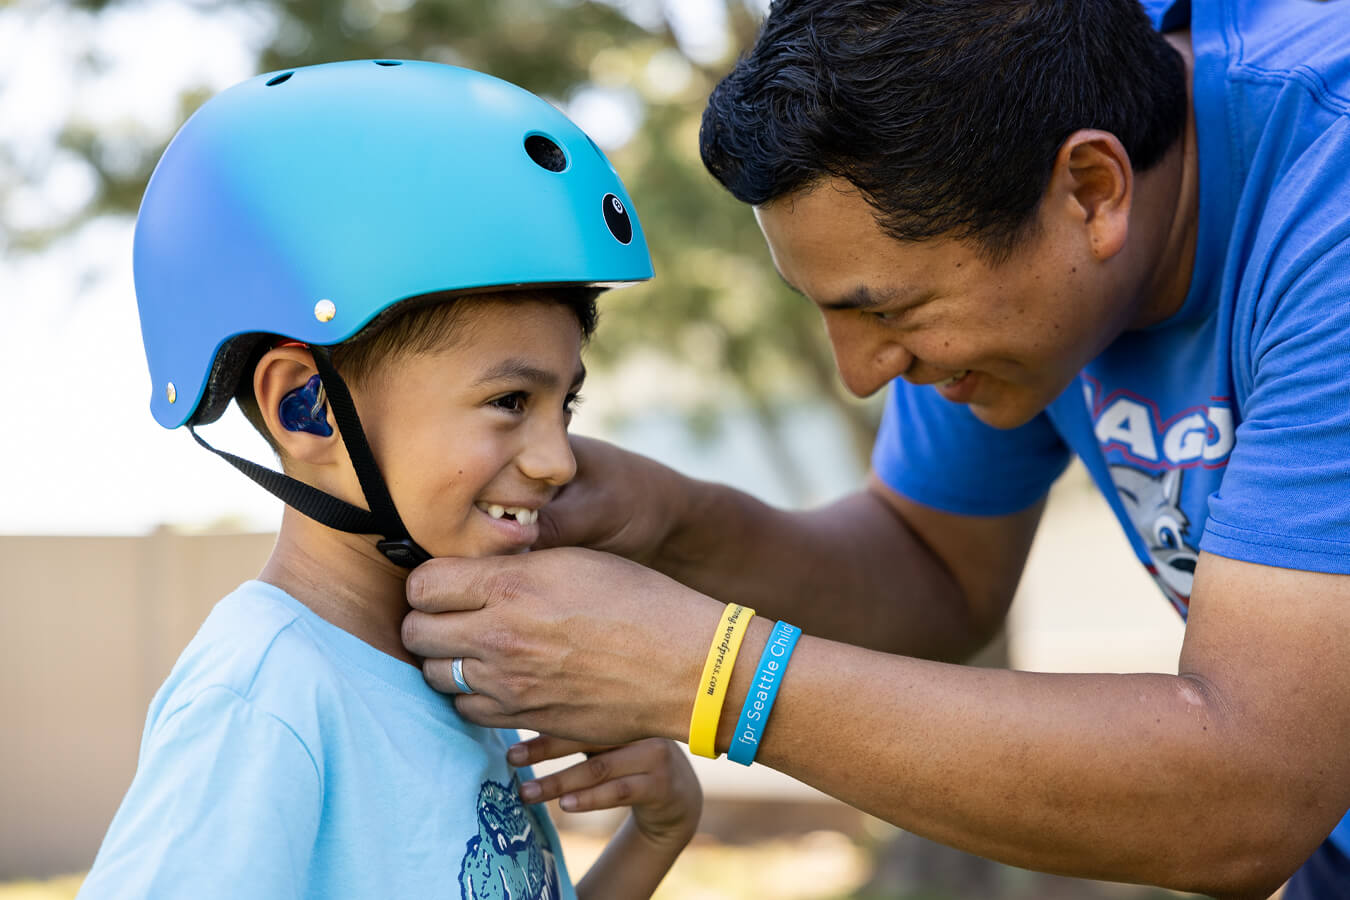 An adult buckles the bike helmet of a smiling child